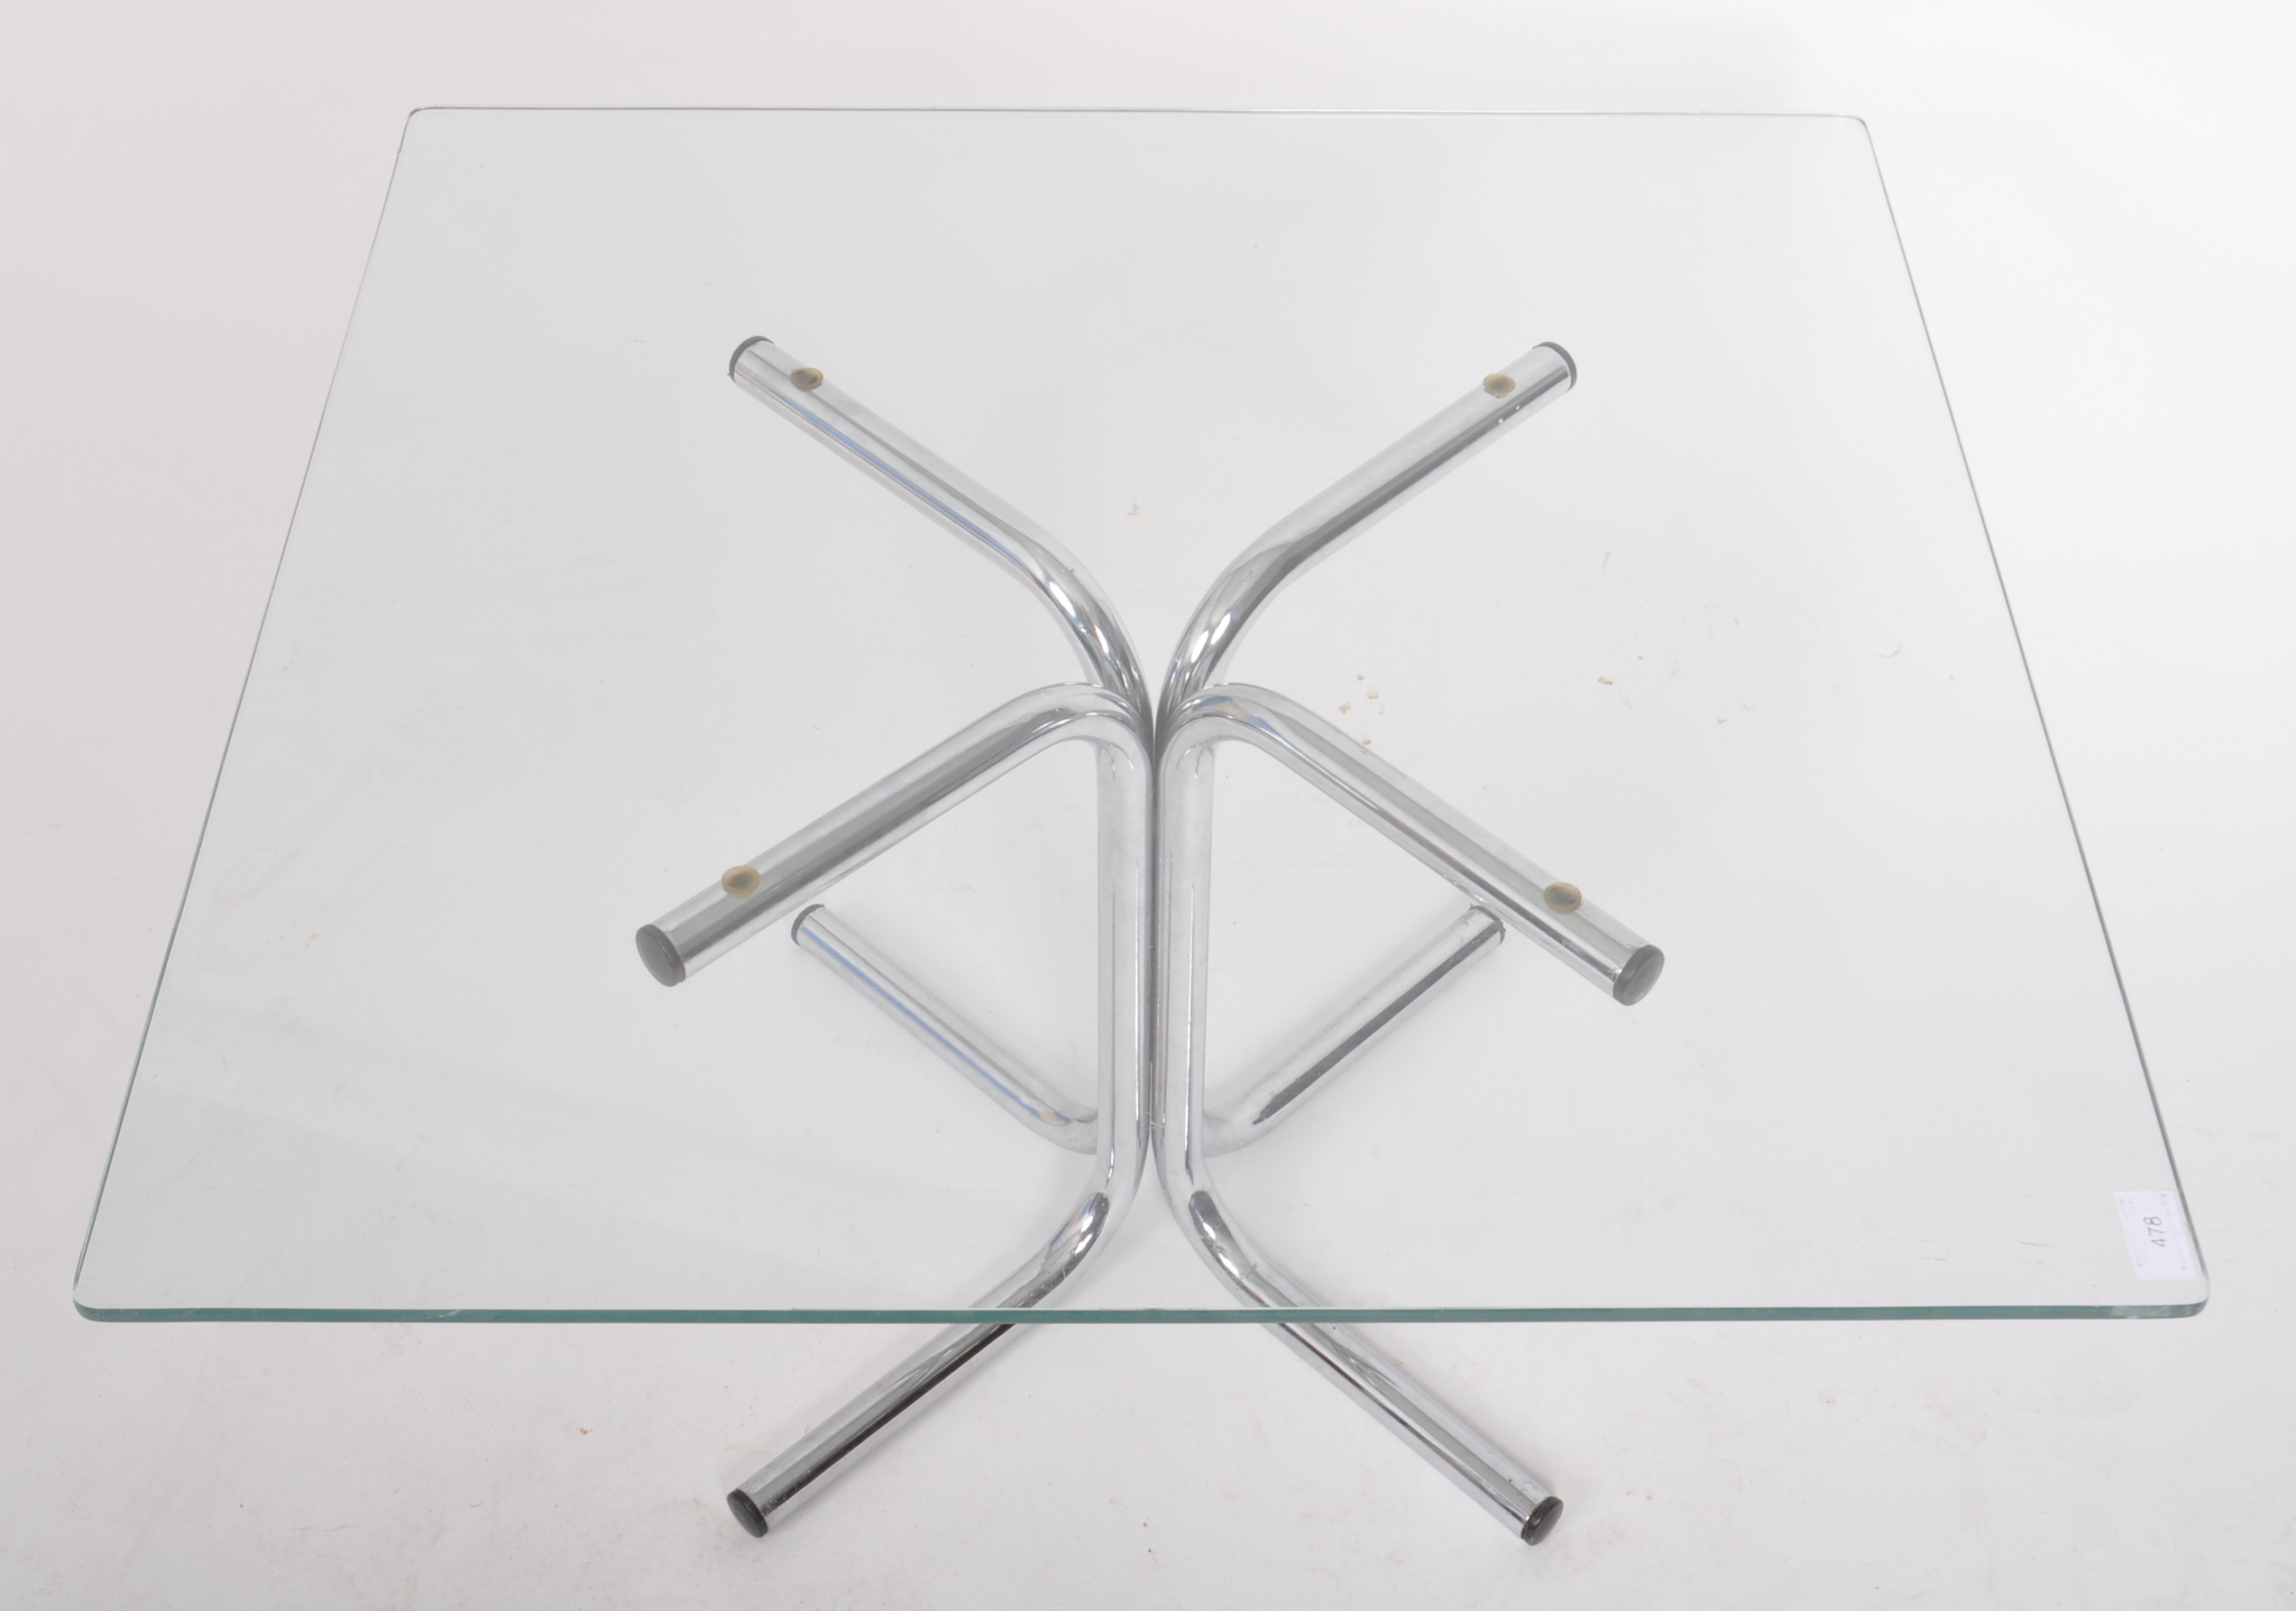 RETRO 20TH CENTURY 1980s CHROME AND GLASS COFFEE TABLE - Image 3 of 4